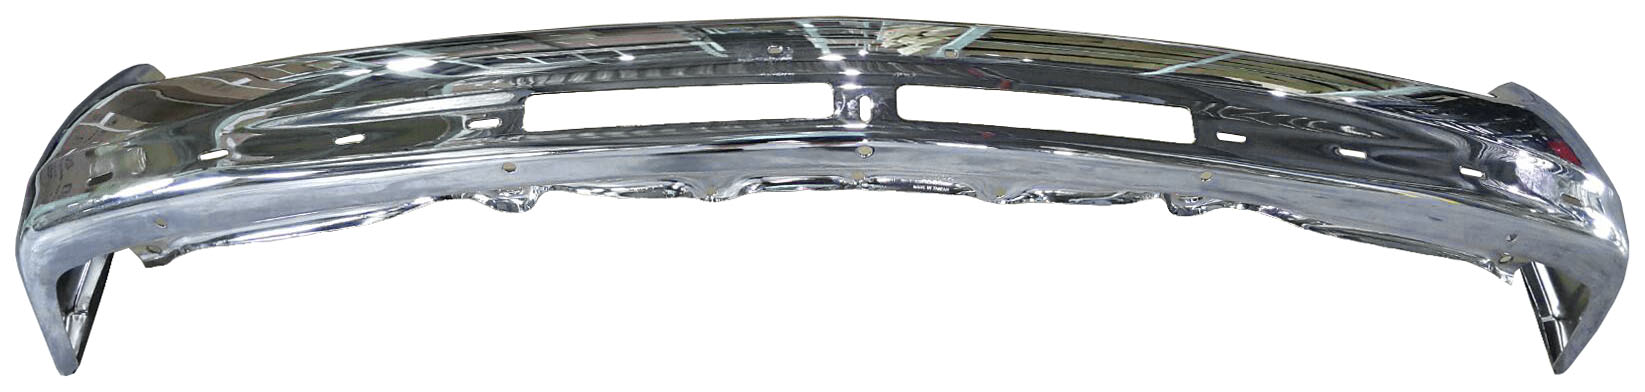 Aftermarket METAL FRONT BUMPERS for CHEVROLET - SUBURBAN 2500, SUBURBAN 2500,00-06,Front bumper face bar